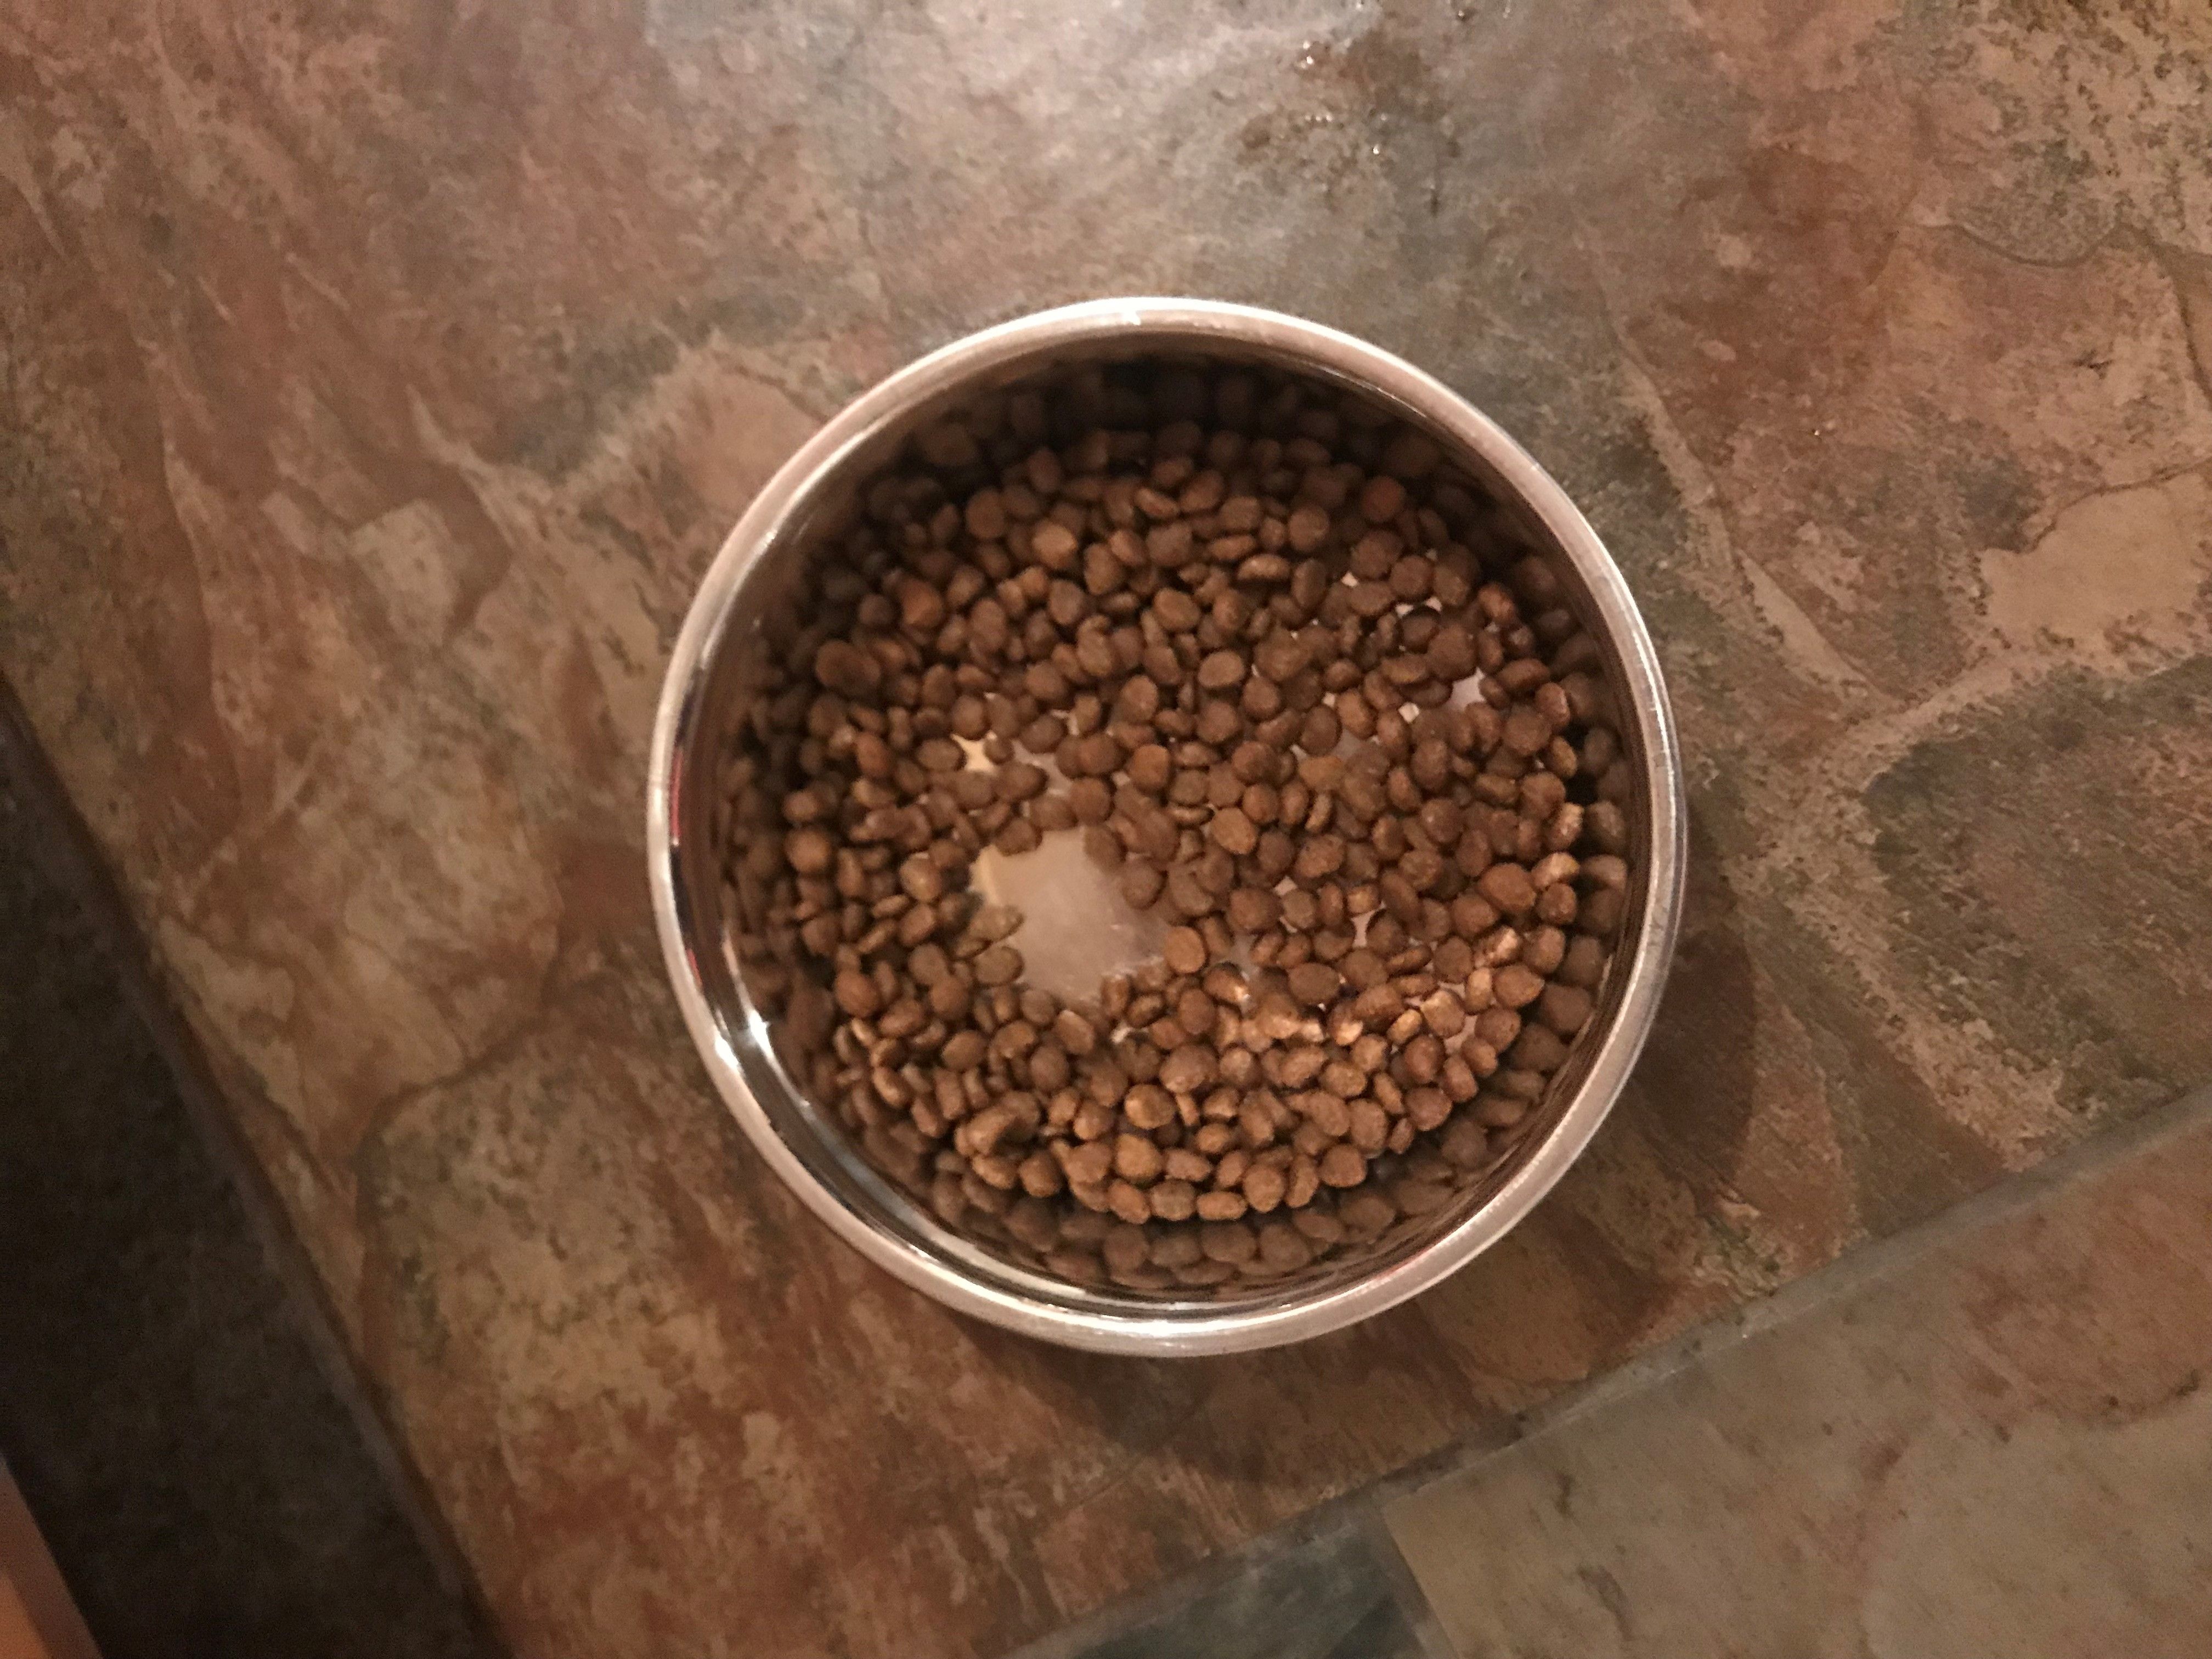 This is cat for, "there's no food in the bowl."